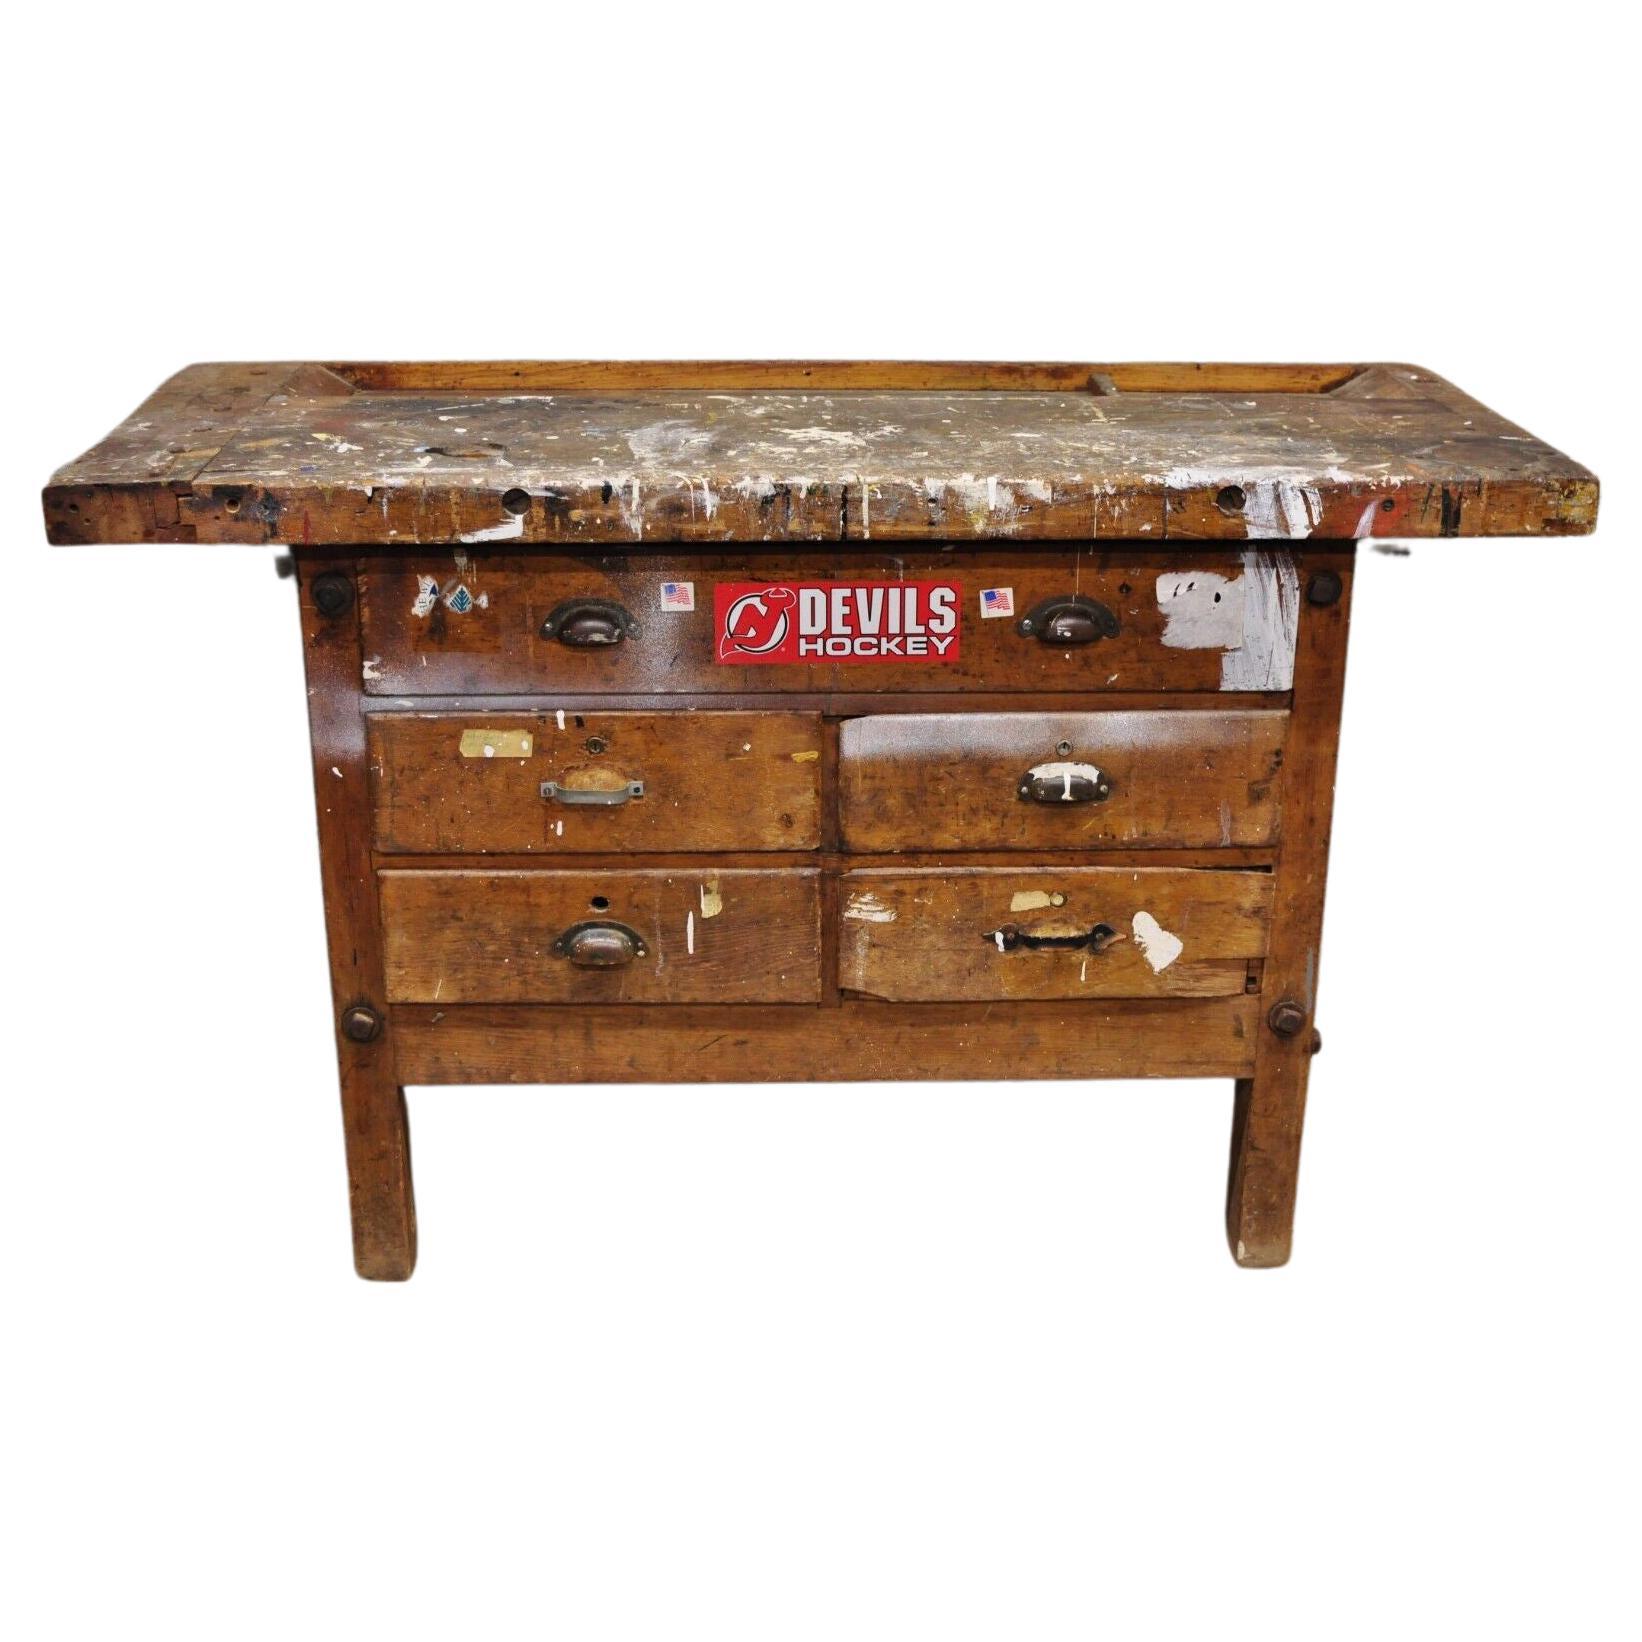 Antique American Industrial Wood Plank Distress Paint Splatter Work Bench Table For Sale